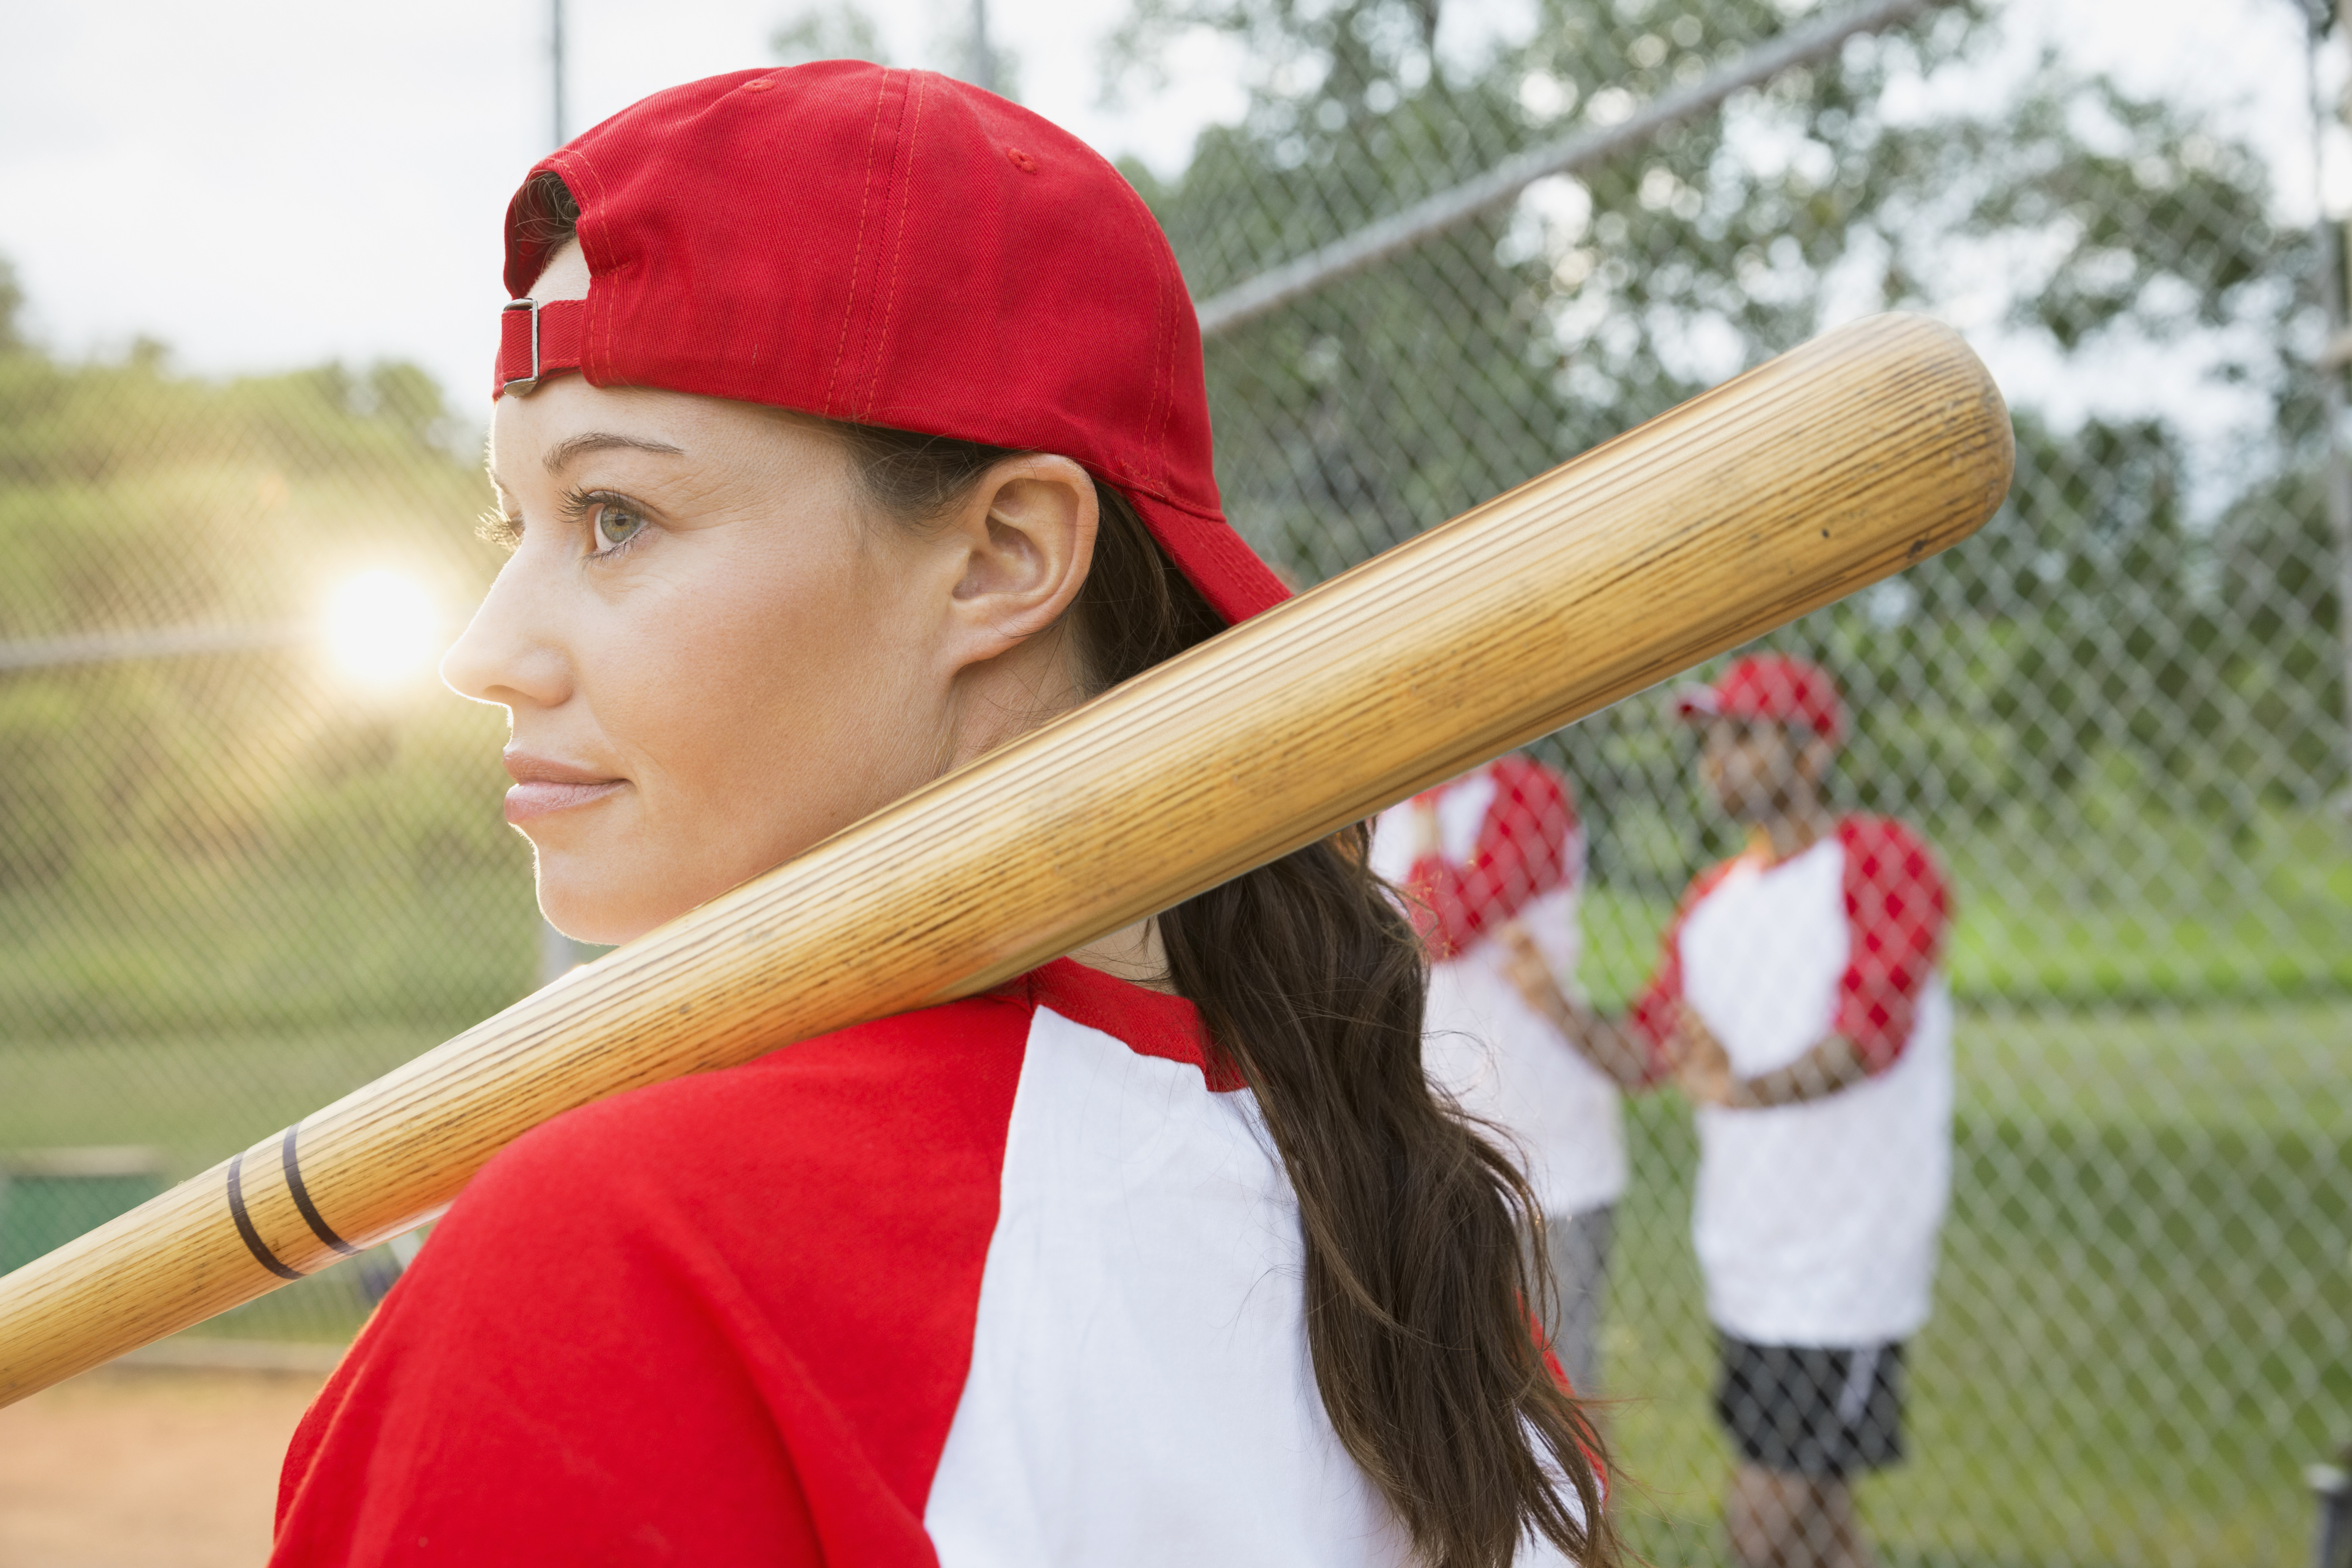 An image of a woman playing baseball. She&#x27;s wearing a red cap backwards and has the bat resting on her shoulder.